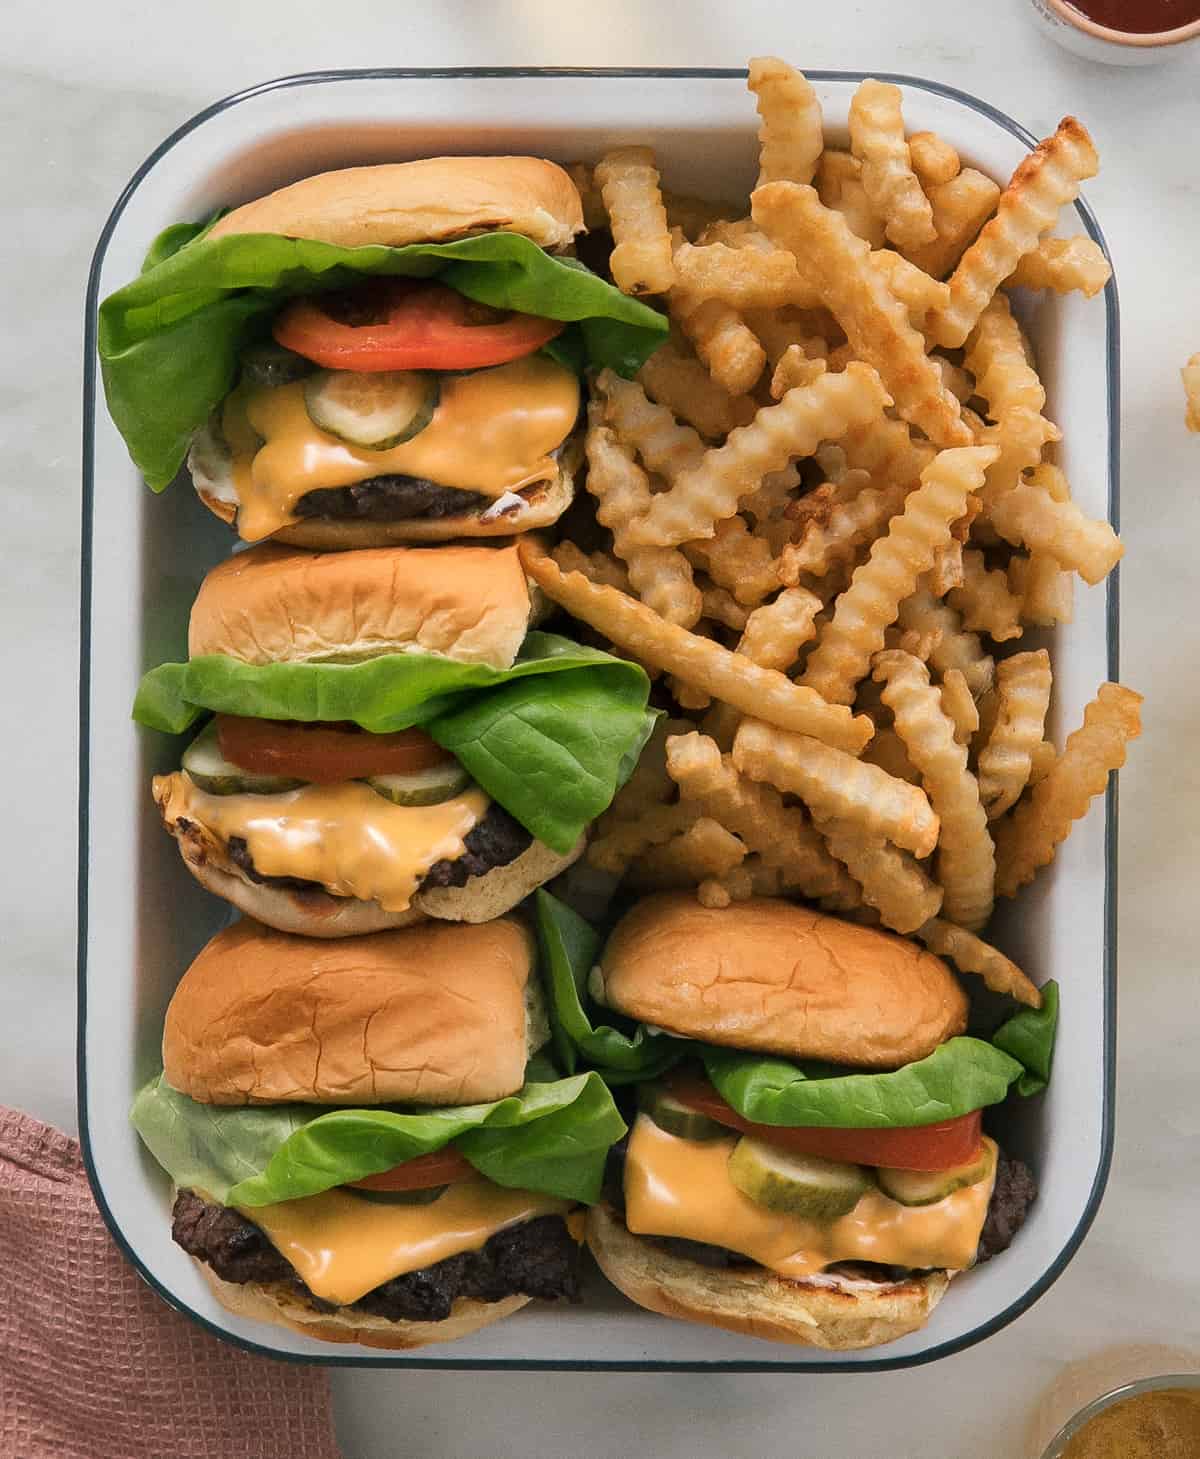 Burgers in a container with crinkle fries.